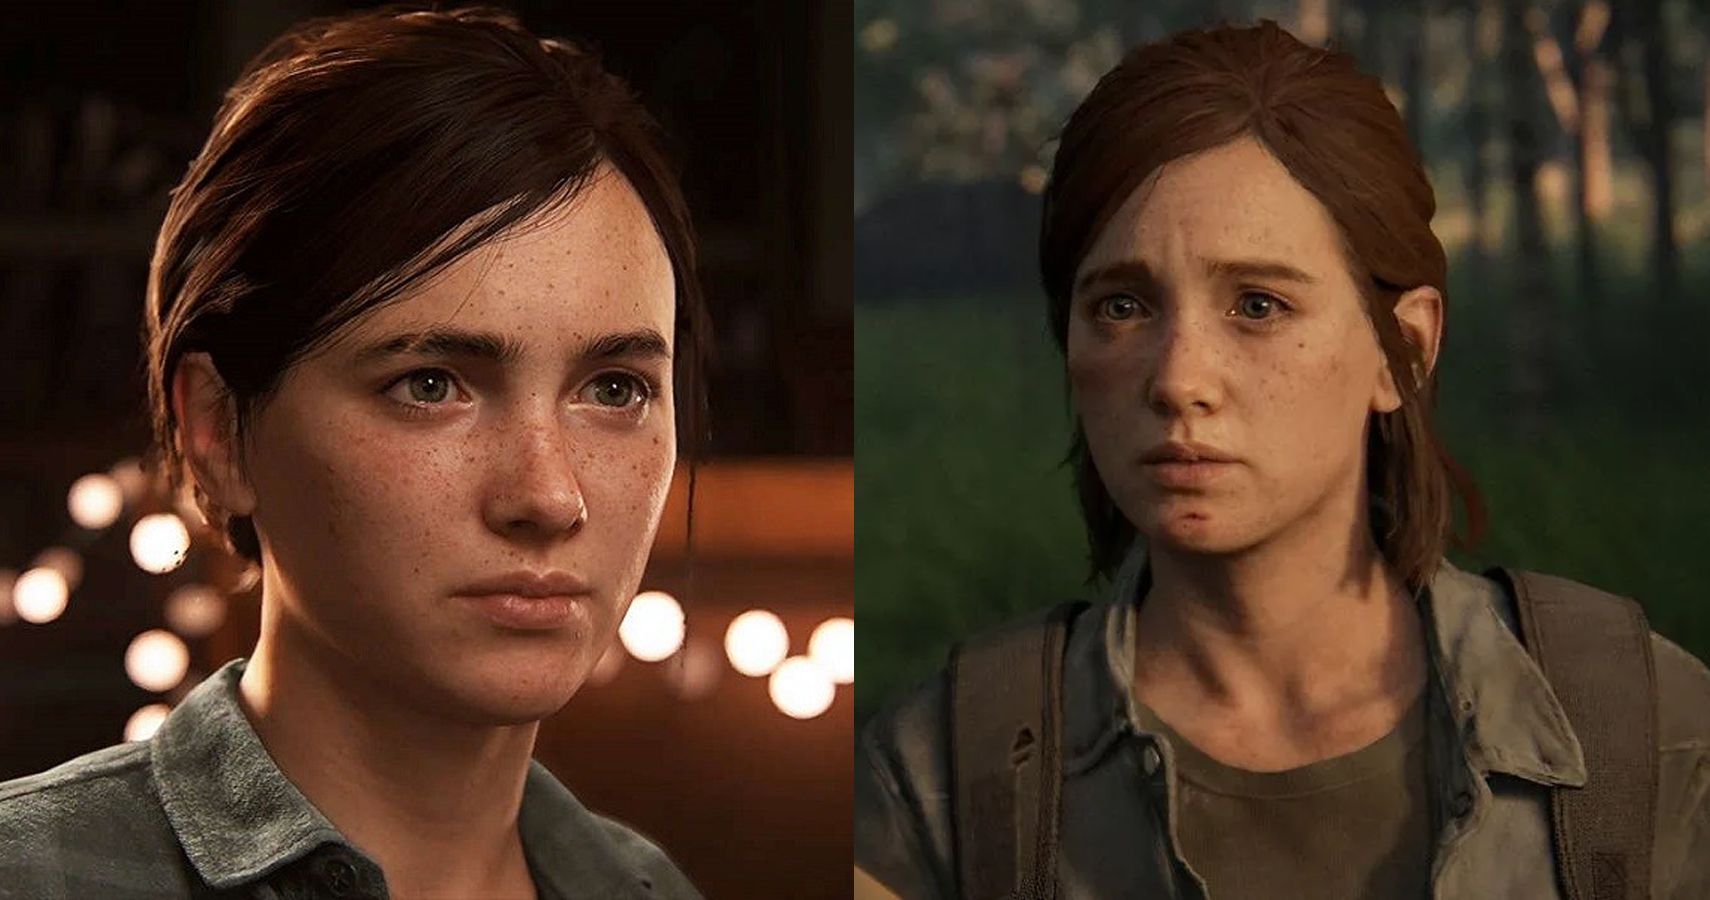 Why The Last of Us Part II Divided so Many People  The last of us, Video  games girls, Video game characters